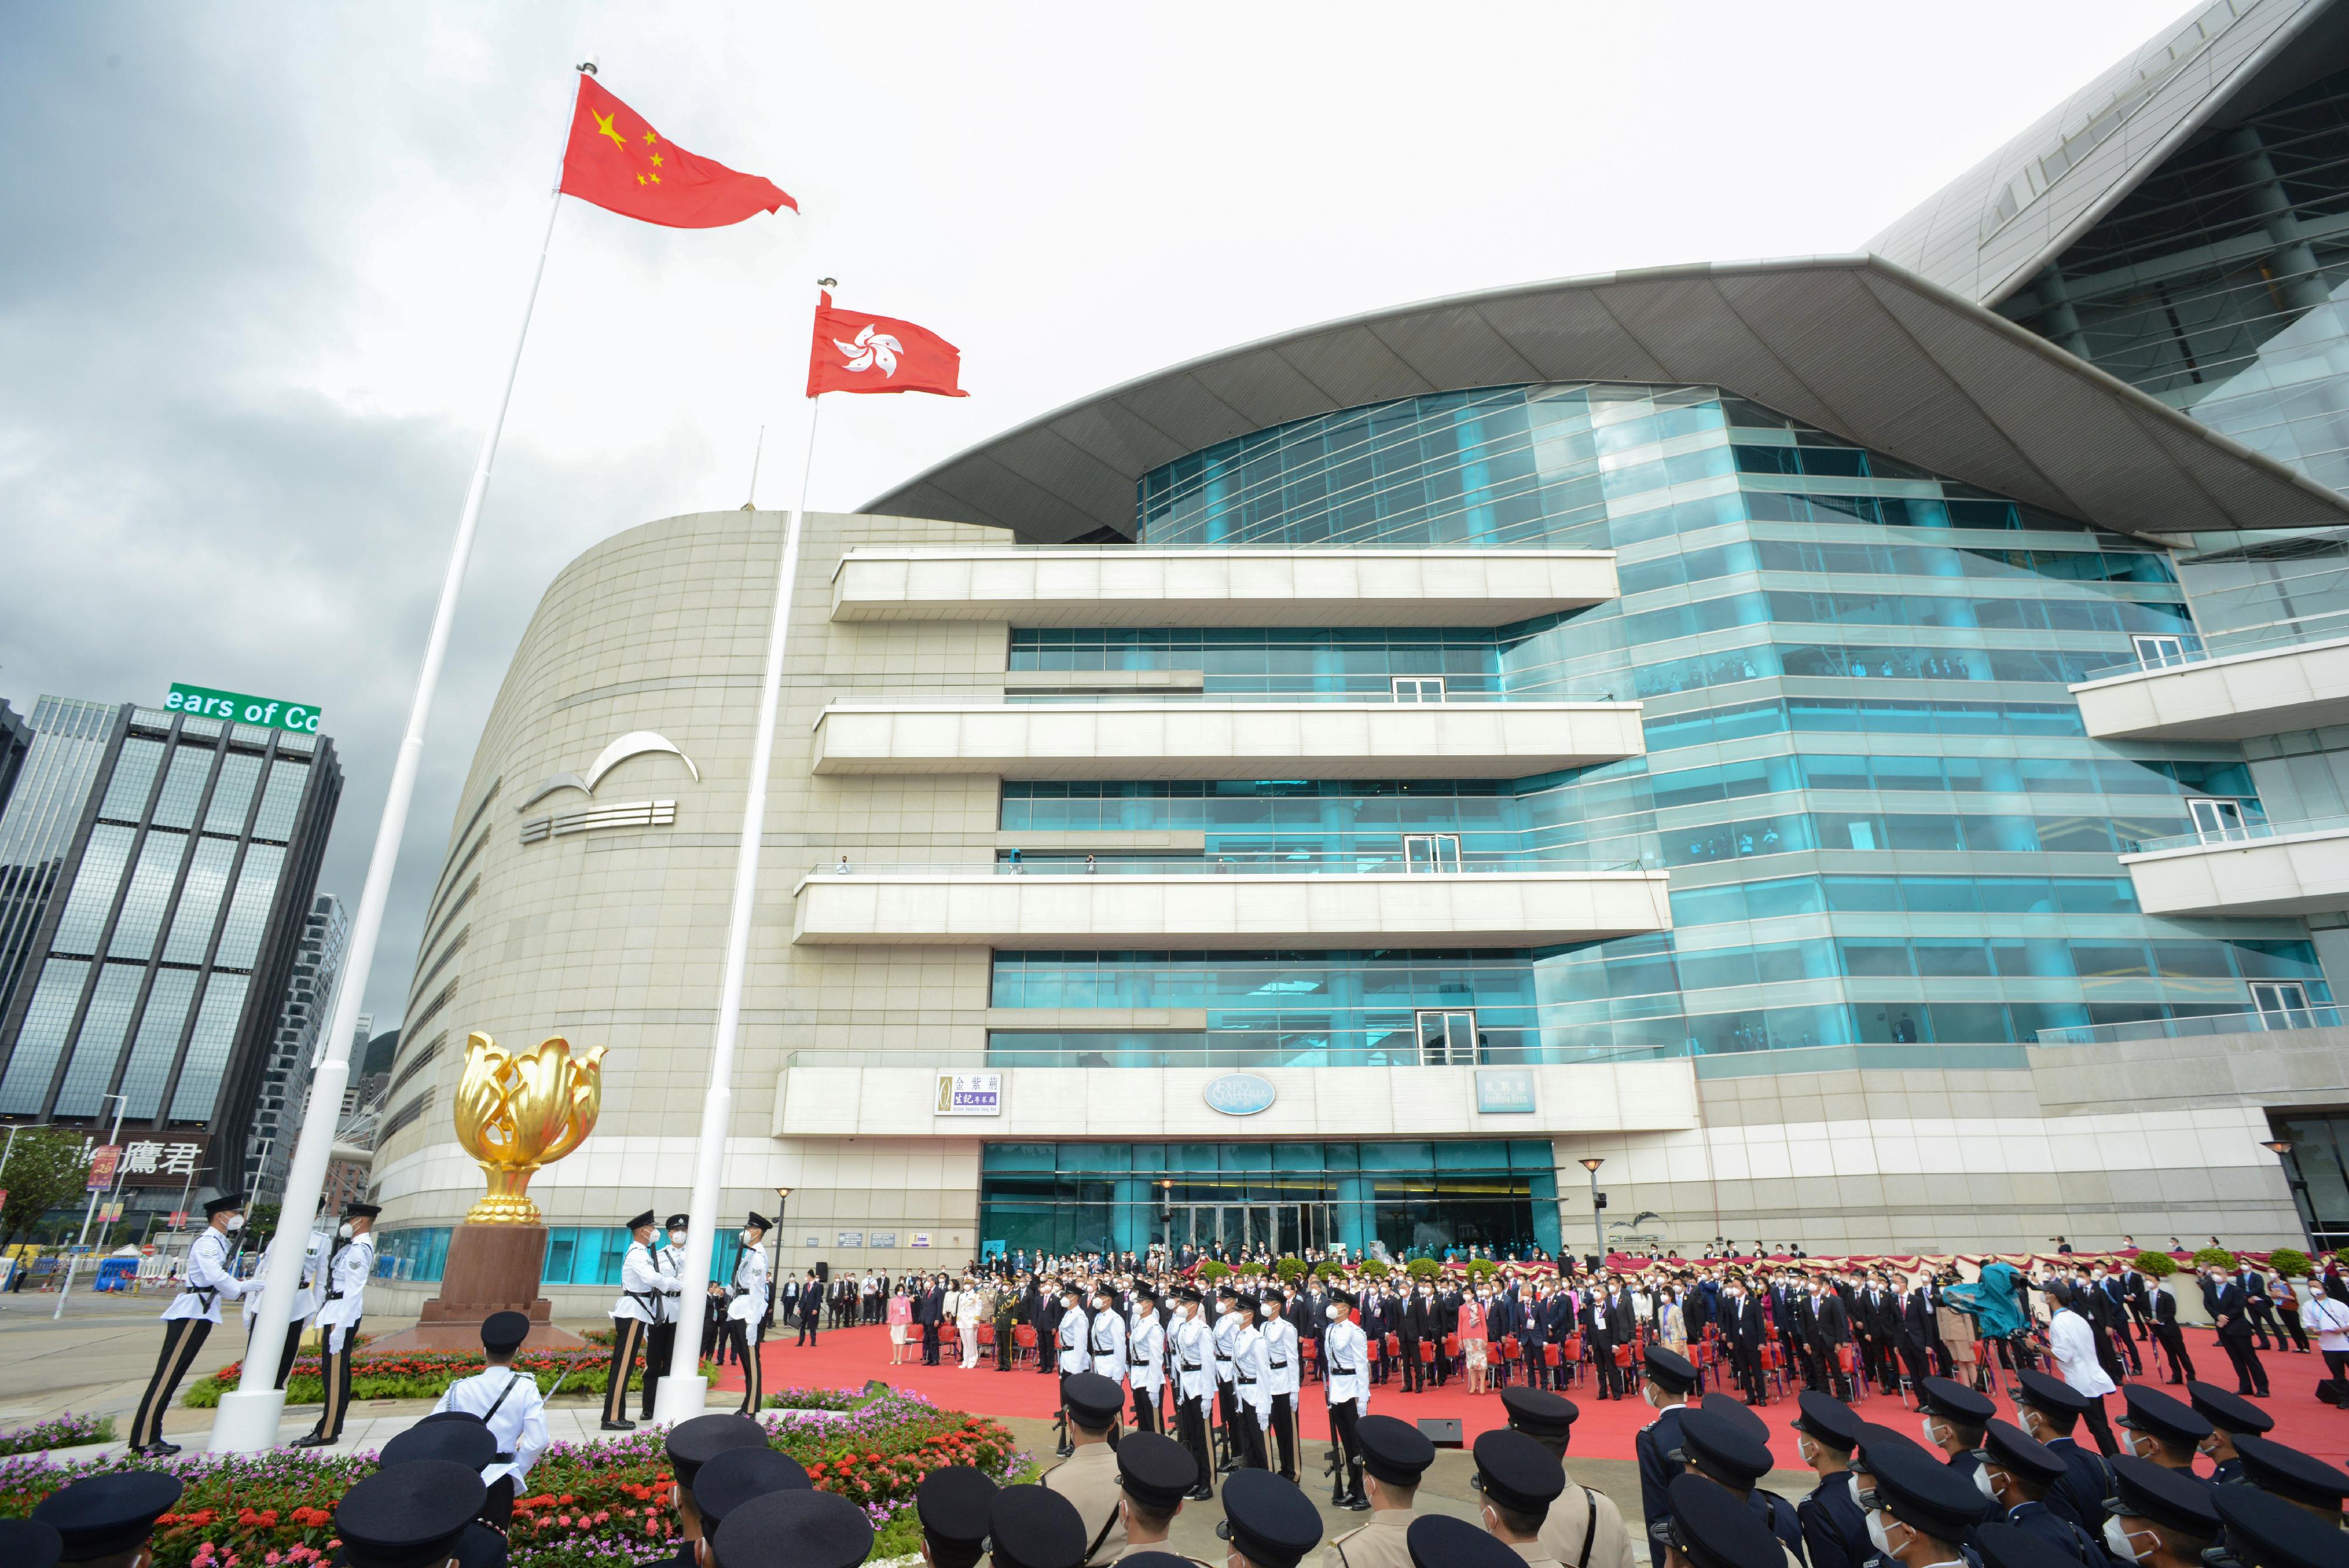 The Chief Executive, Mr John Lee, Principal Officials and guests attend the Flag-raising Ceremony to Celebrate the 25th Anniversary of the Establishment of the Hong Kong Special Administrative Region of the People's Republic of China at Golden Bauhinia Square this morning (July 1).